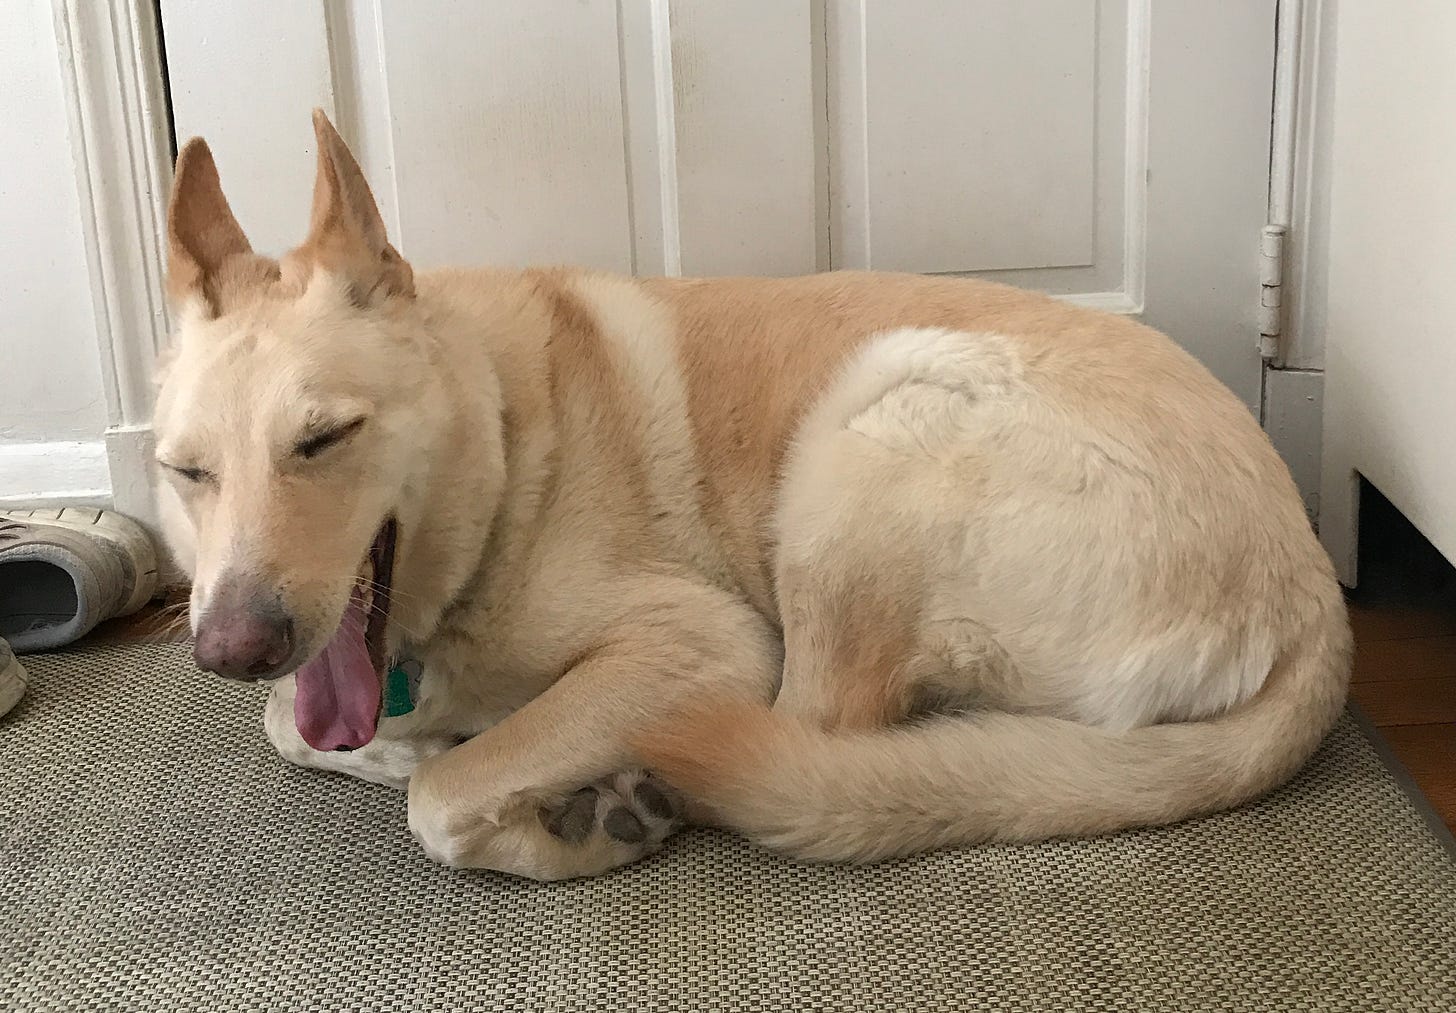 A yawning dog curled up at the front door. Big guy - white German shepherd, total sweetheart